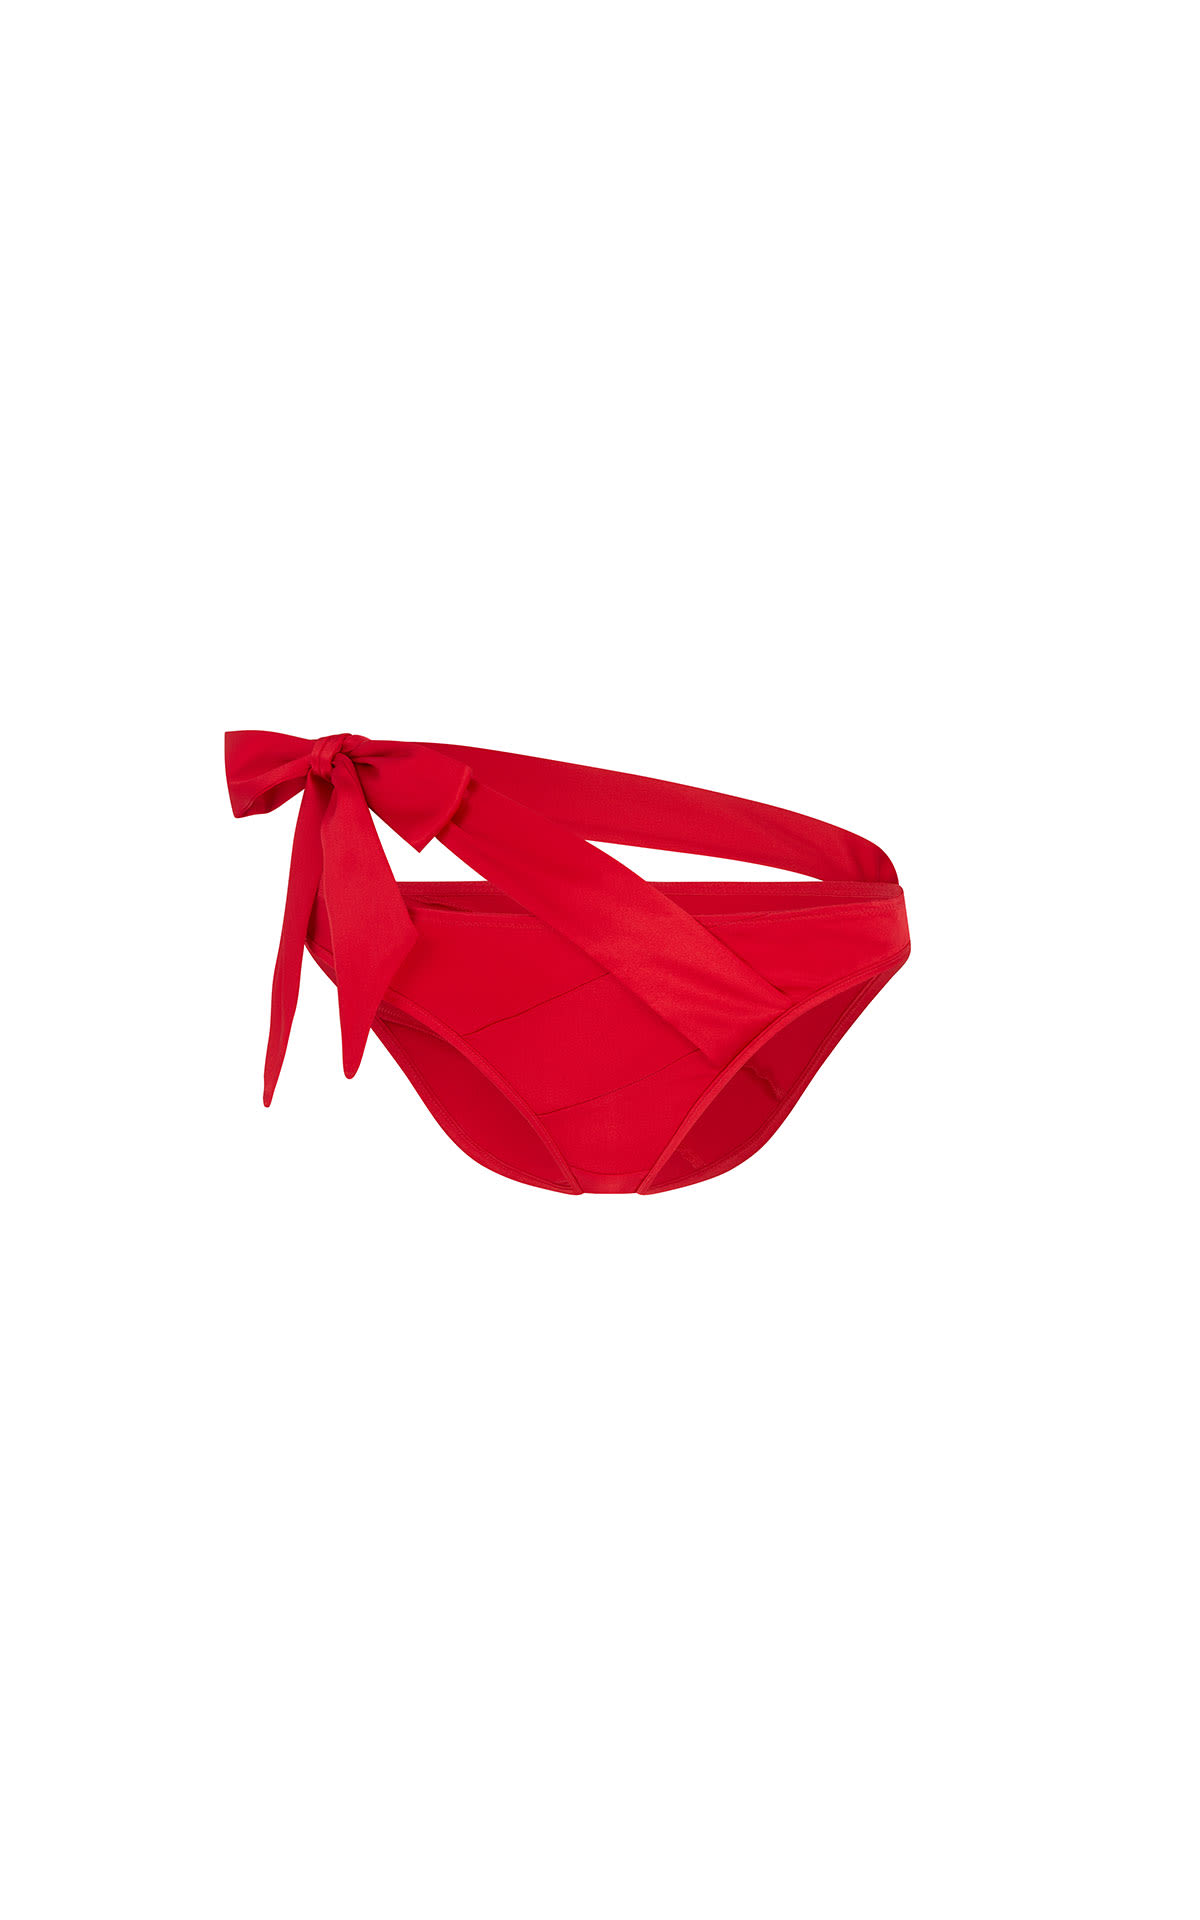 Agent Provocateur Sugar brief red from Bicester Village